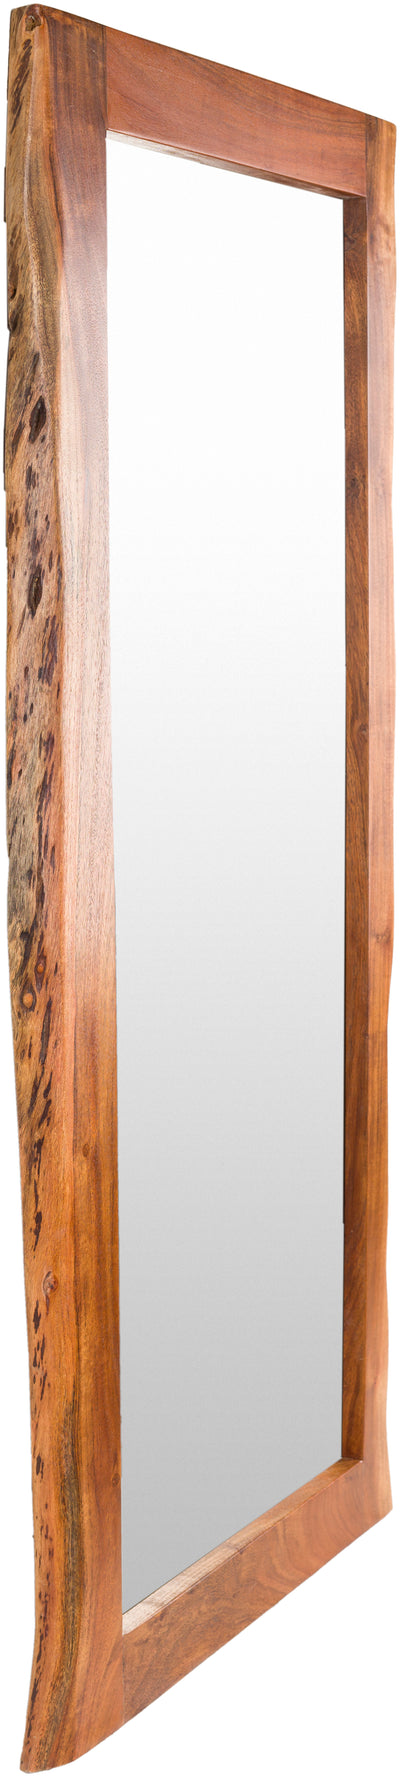 product image for Edge DGE-101 Tall Rectangular Mirror by Surya 2